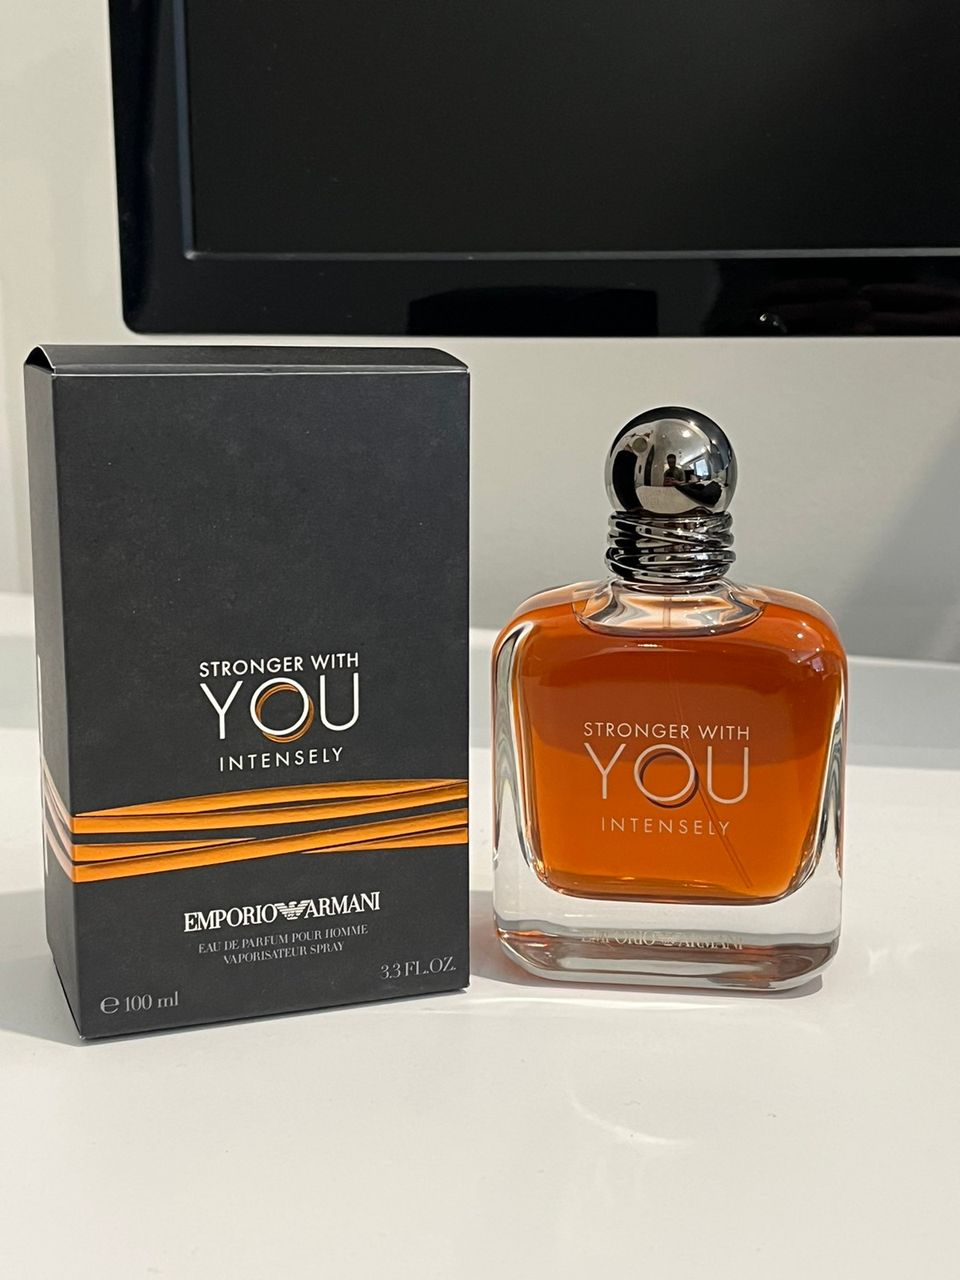 Stronger with you intensley 100ml